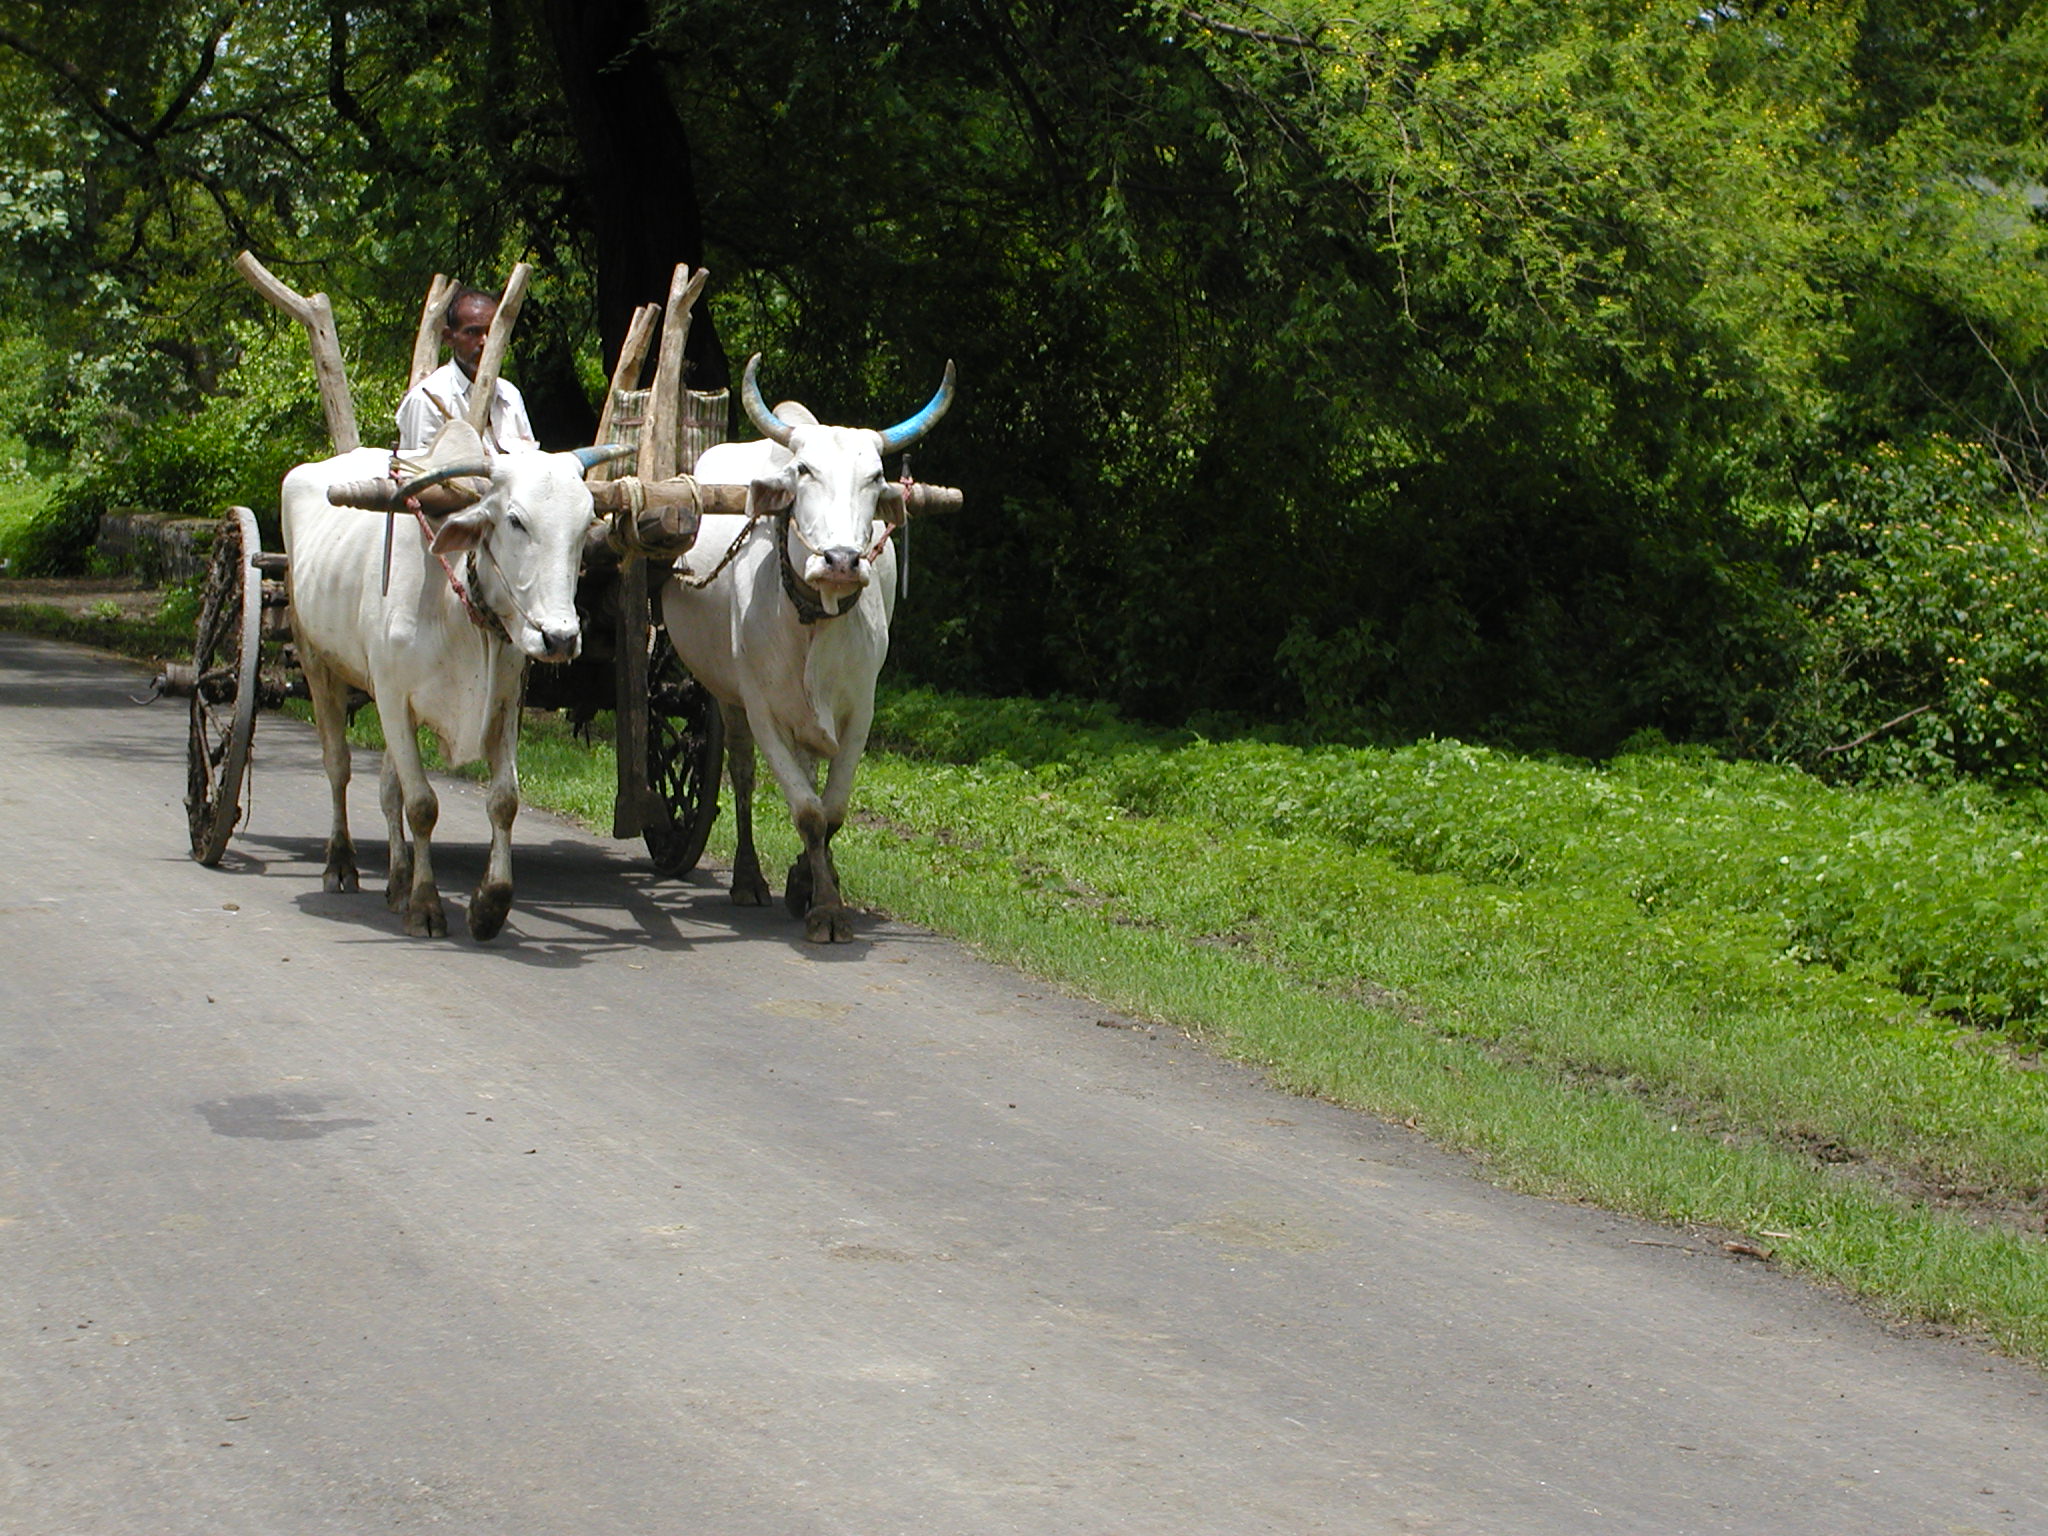 A cattle-drawn cart on the streets near Nagpur 